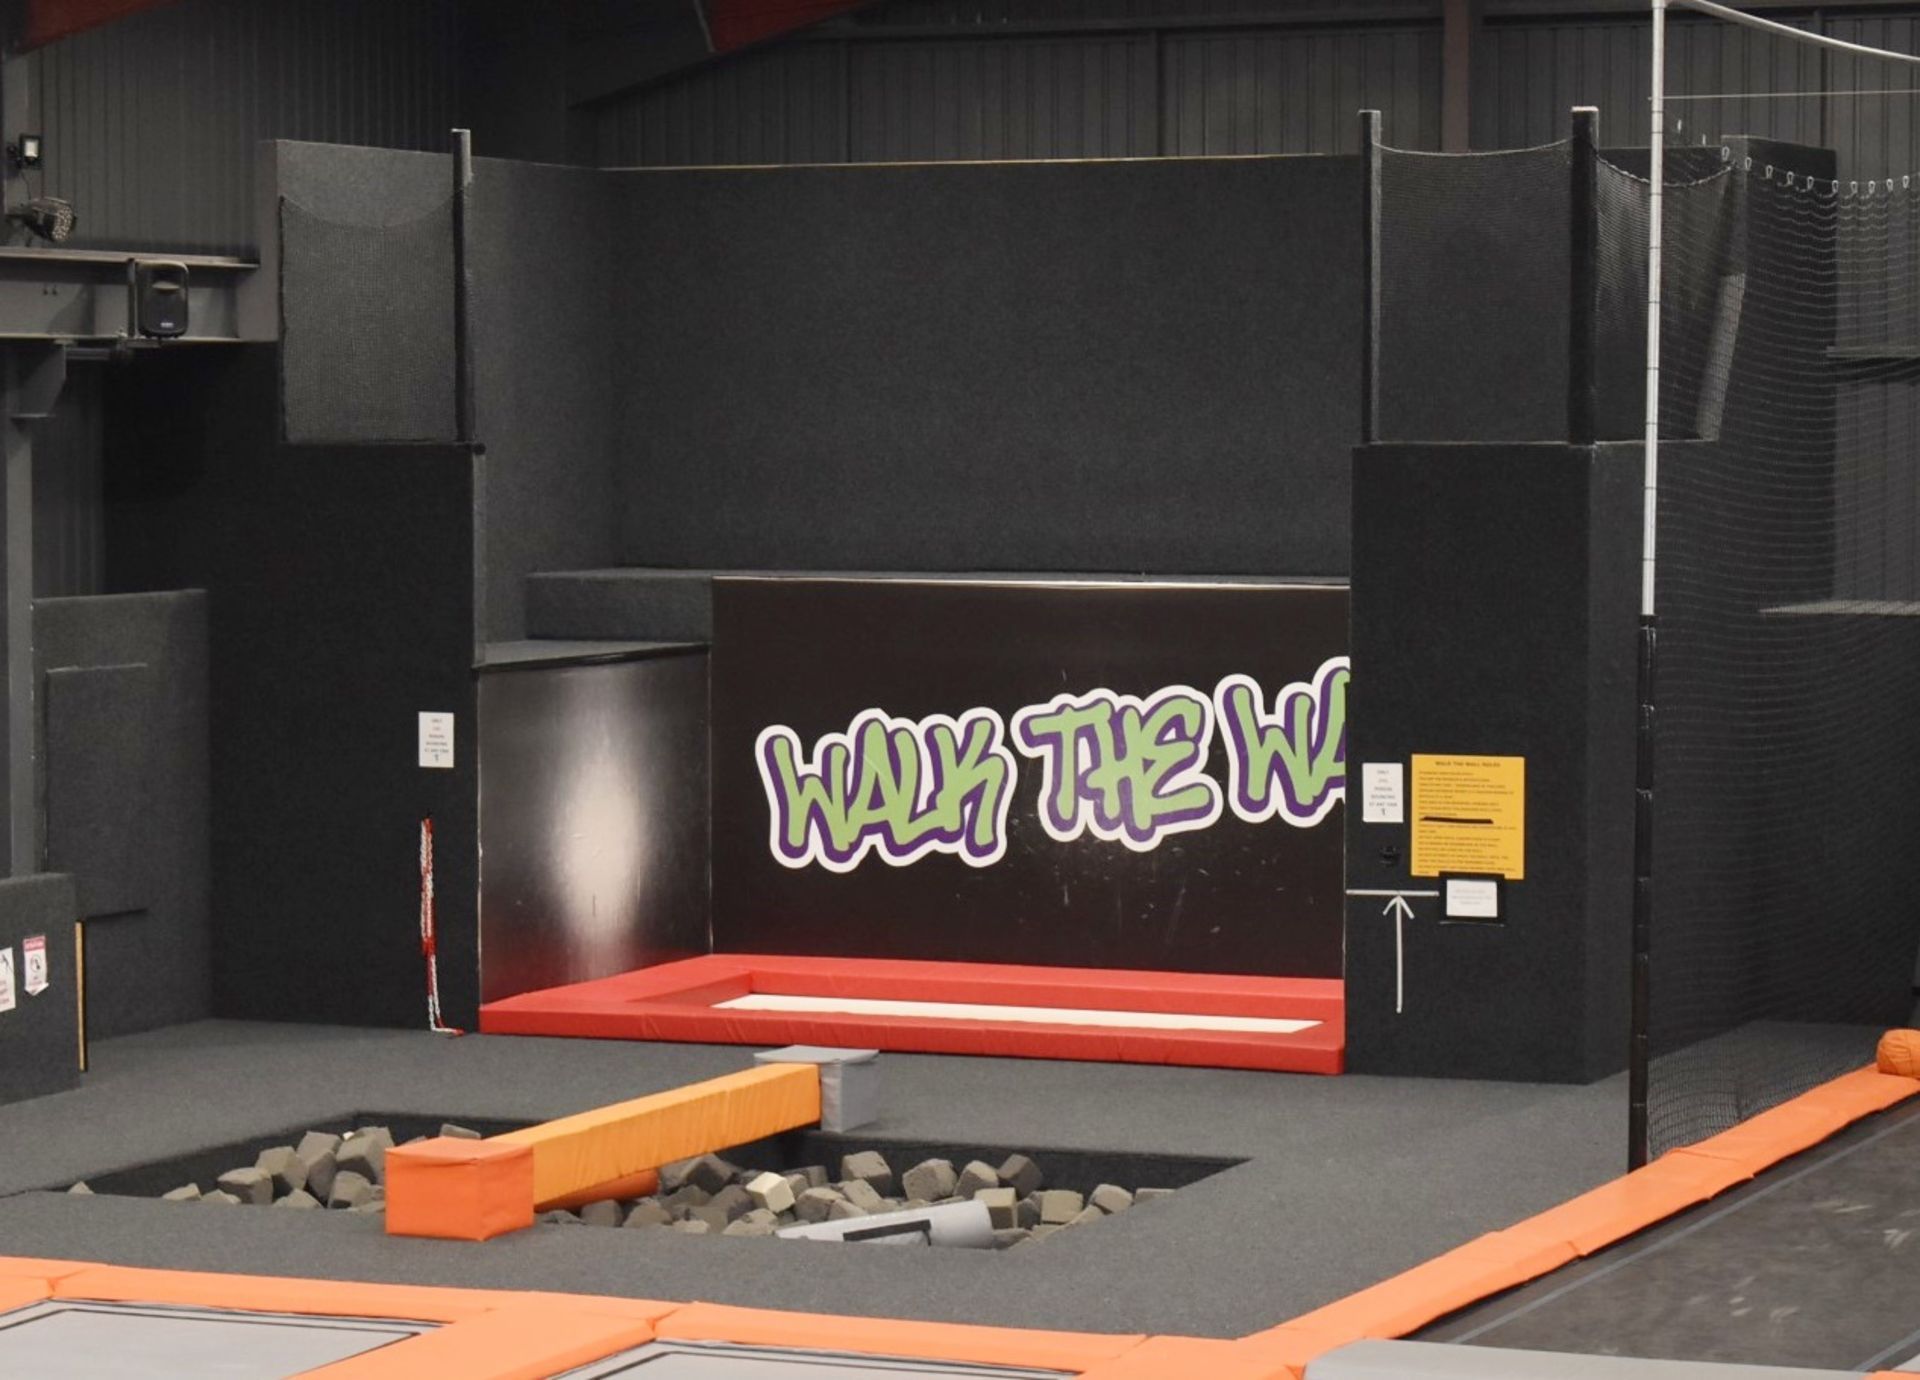 1 x Large Trampoline Park - Disassembled - Includes Dodgeball Arena And Jump Tower - CL766  - - Image 40 of 99